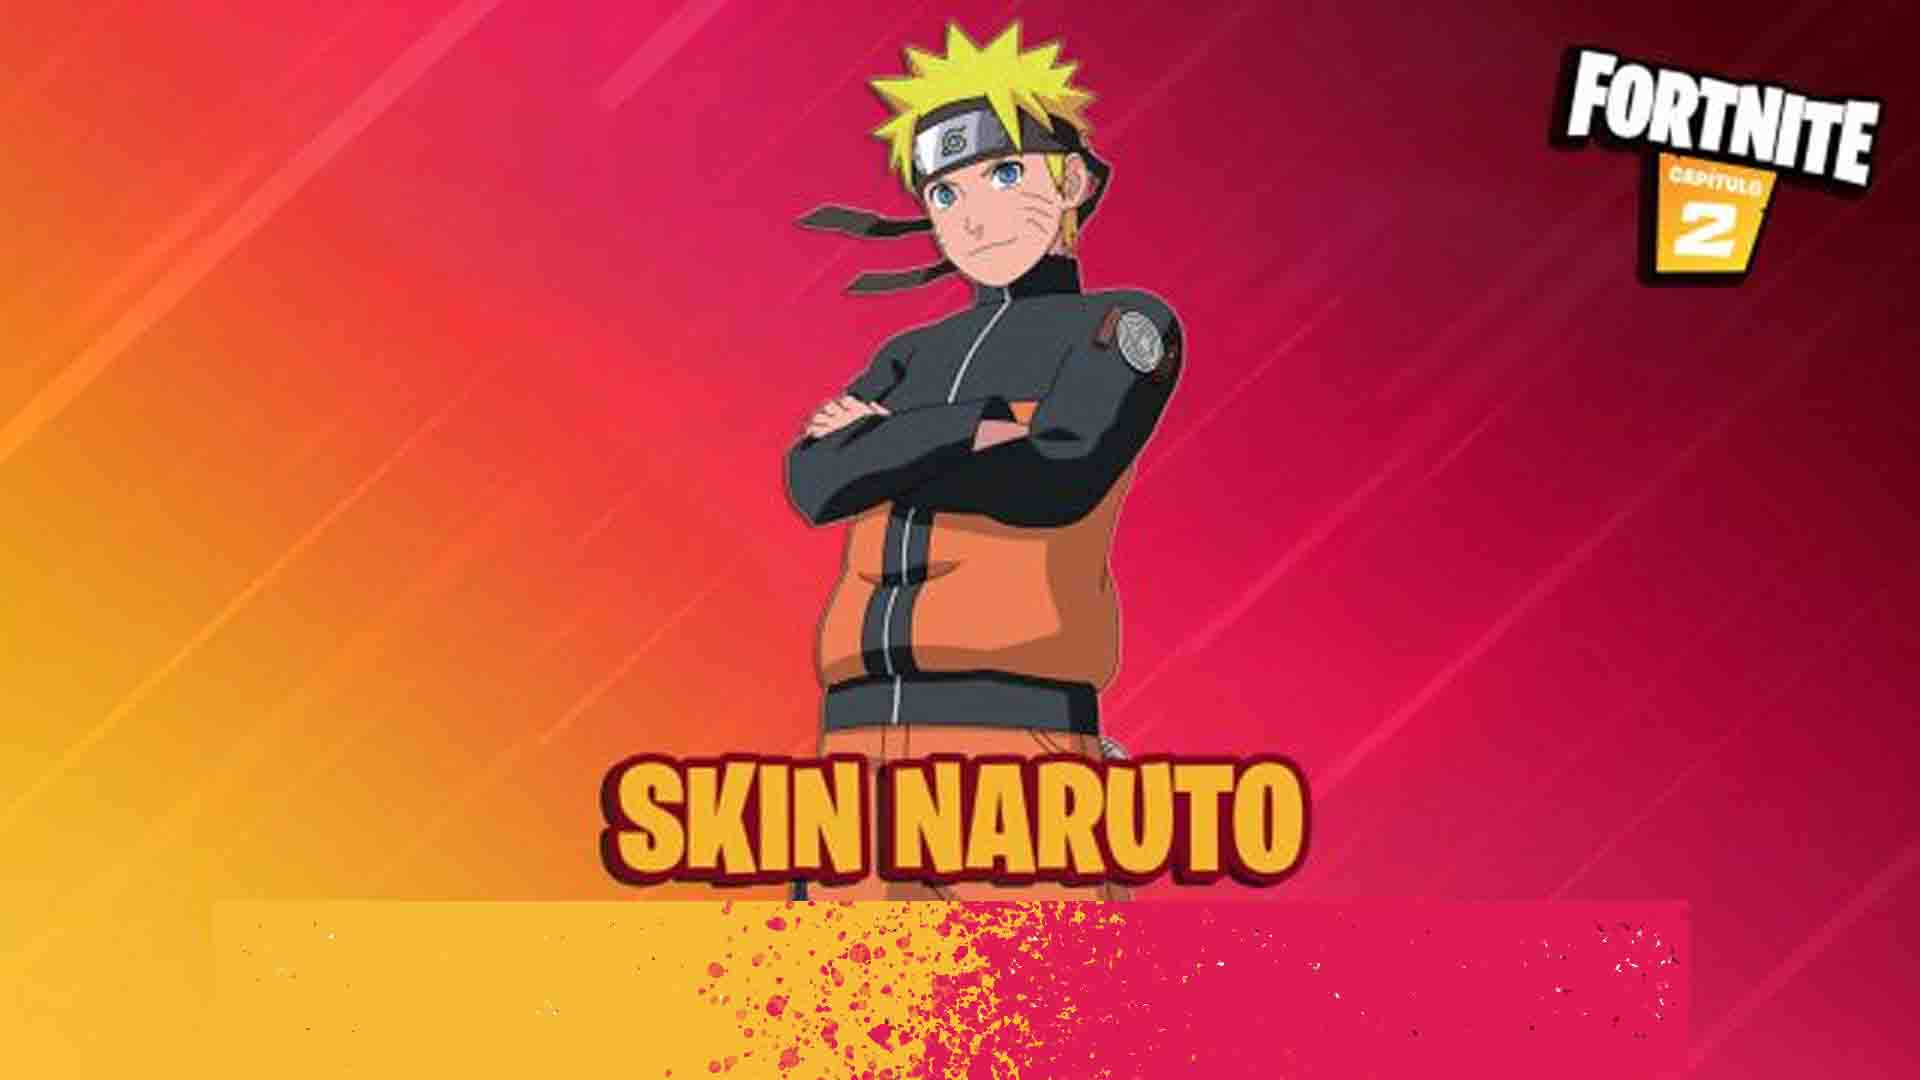 Fortnite x Naruto is now official skin release date confirmed